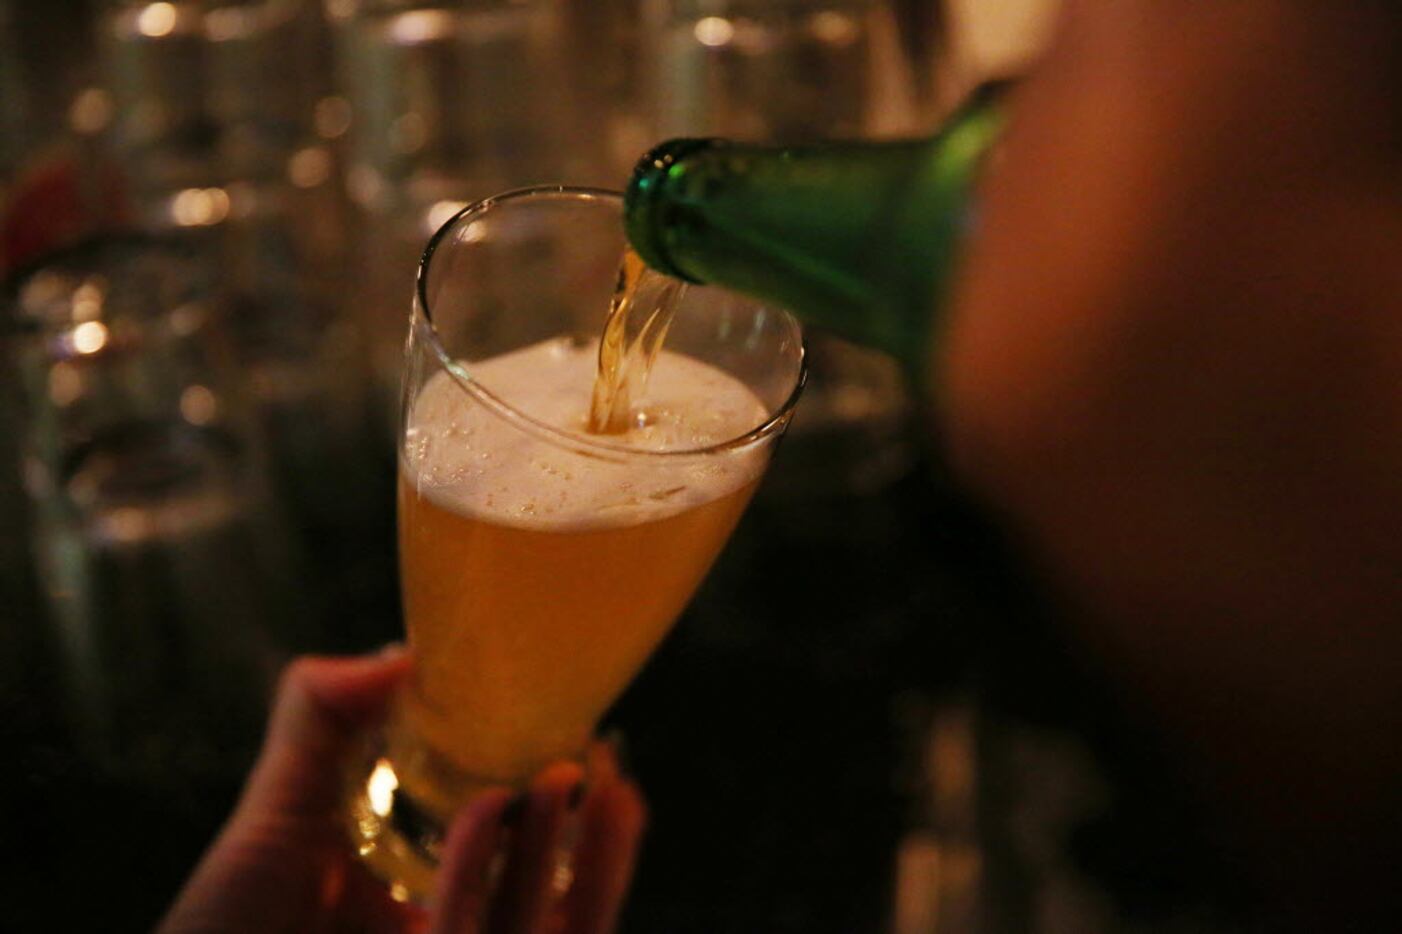 A bartender pours a beer during trivia night at the Holy Grail Pub in Plano.